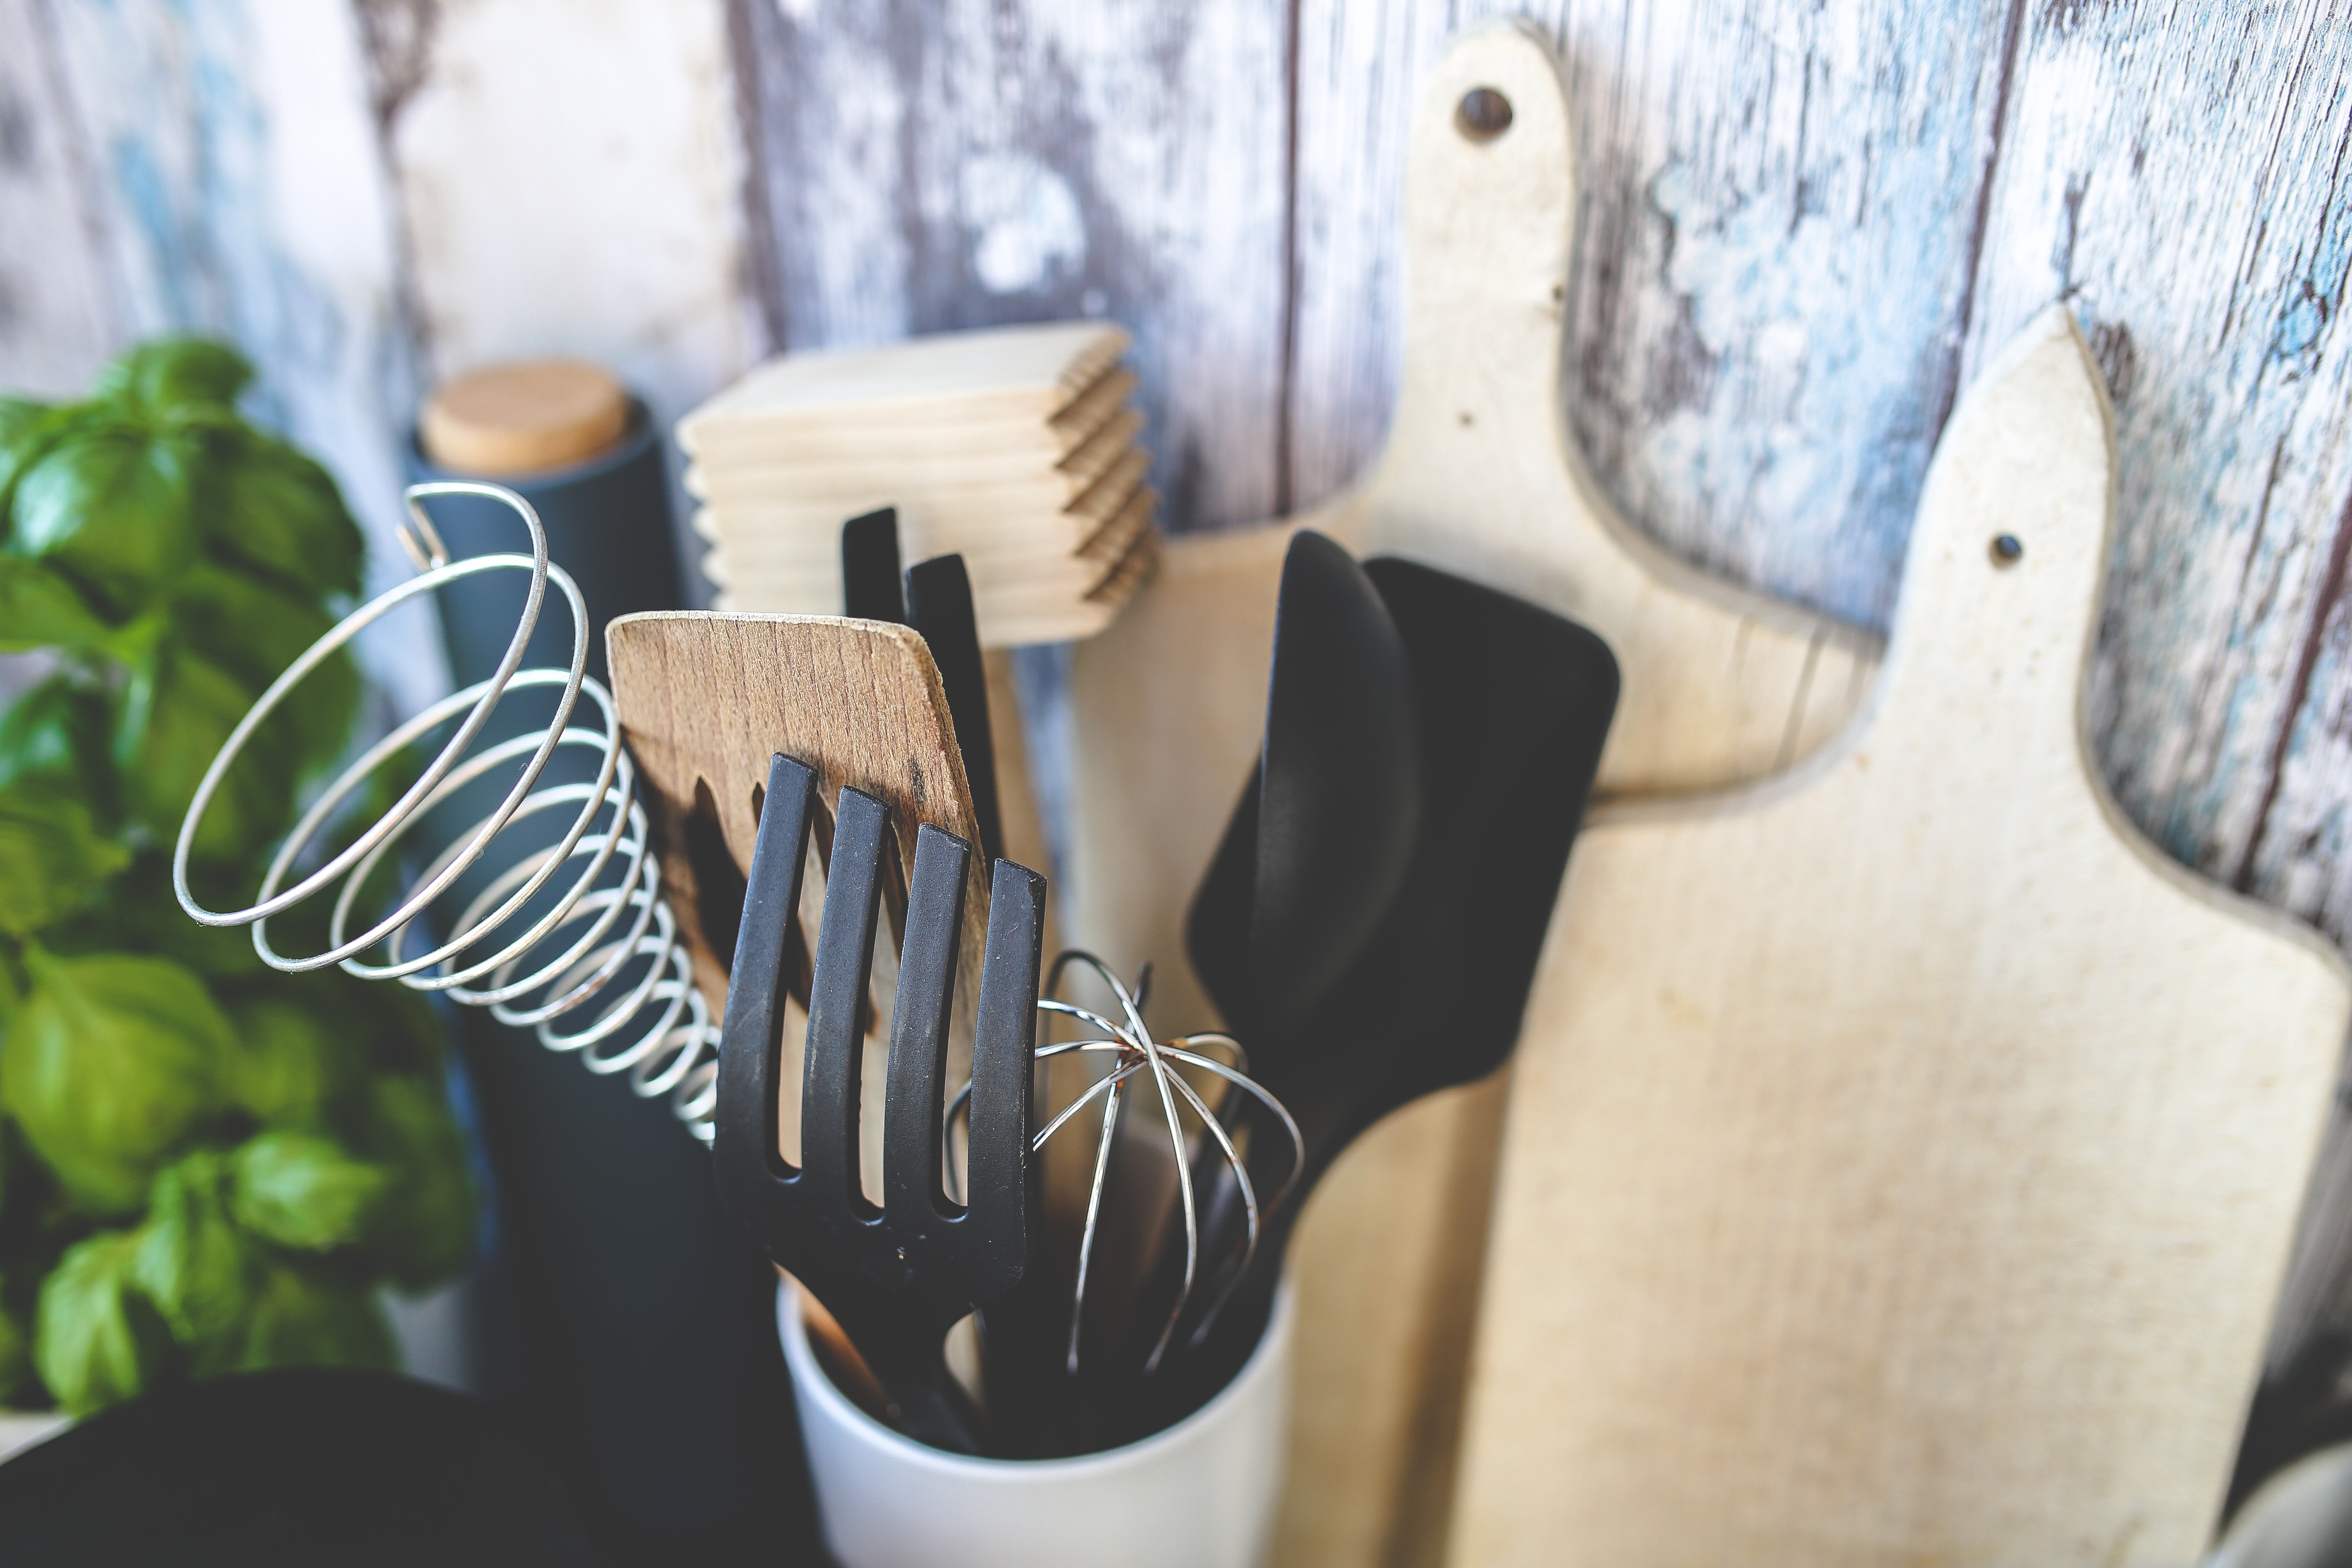 A Set Of Cooking Utensils Or A Kitchen Appliance